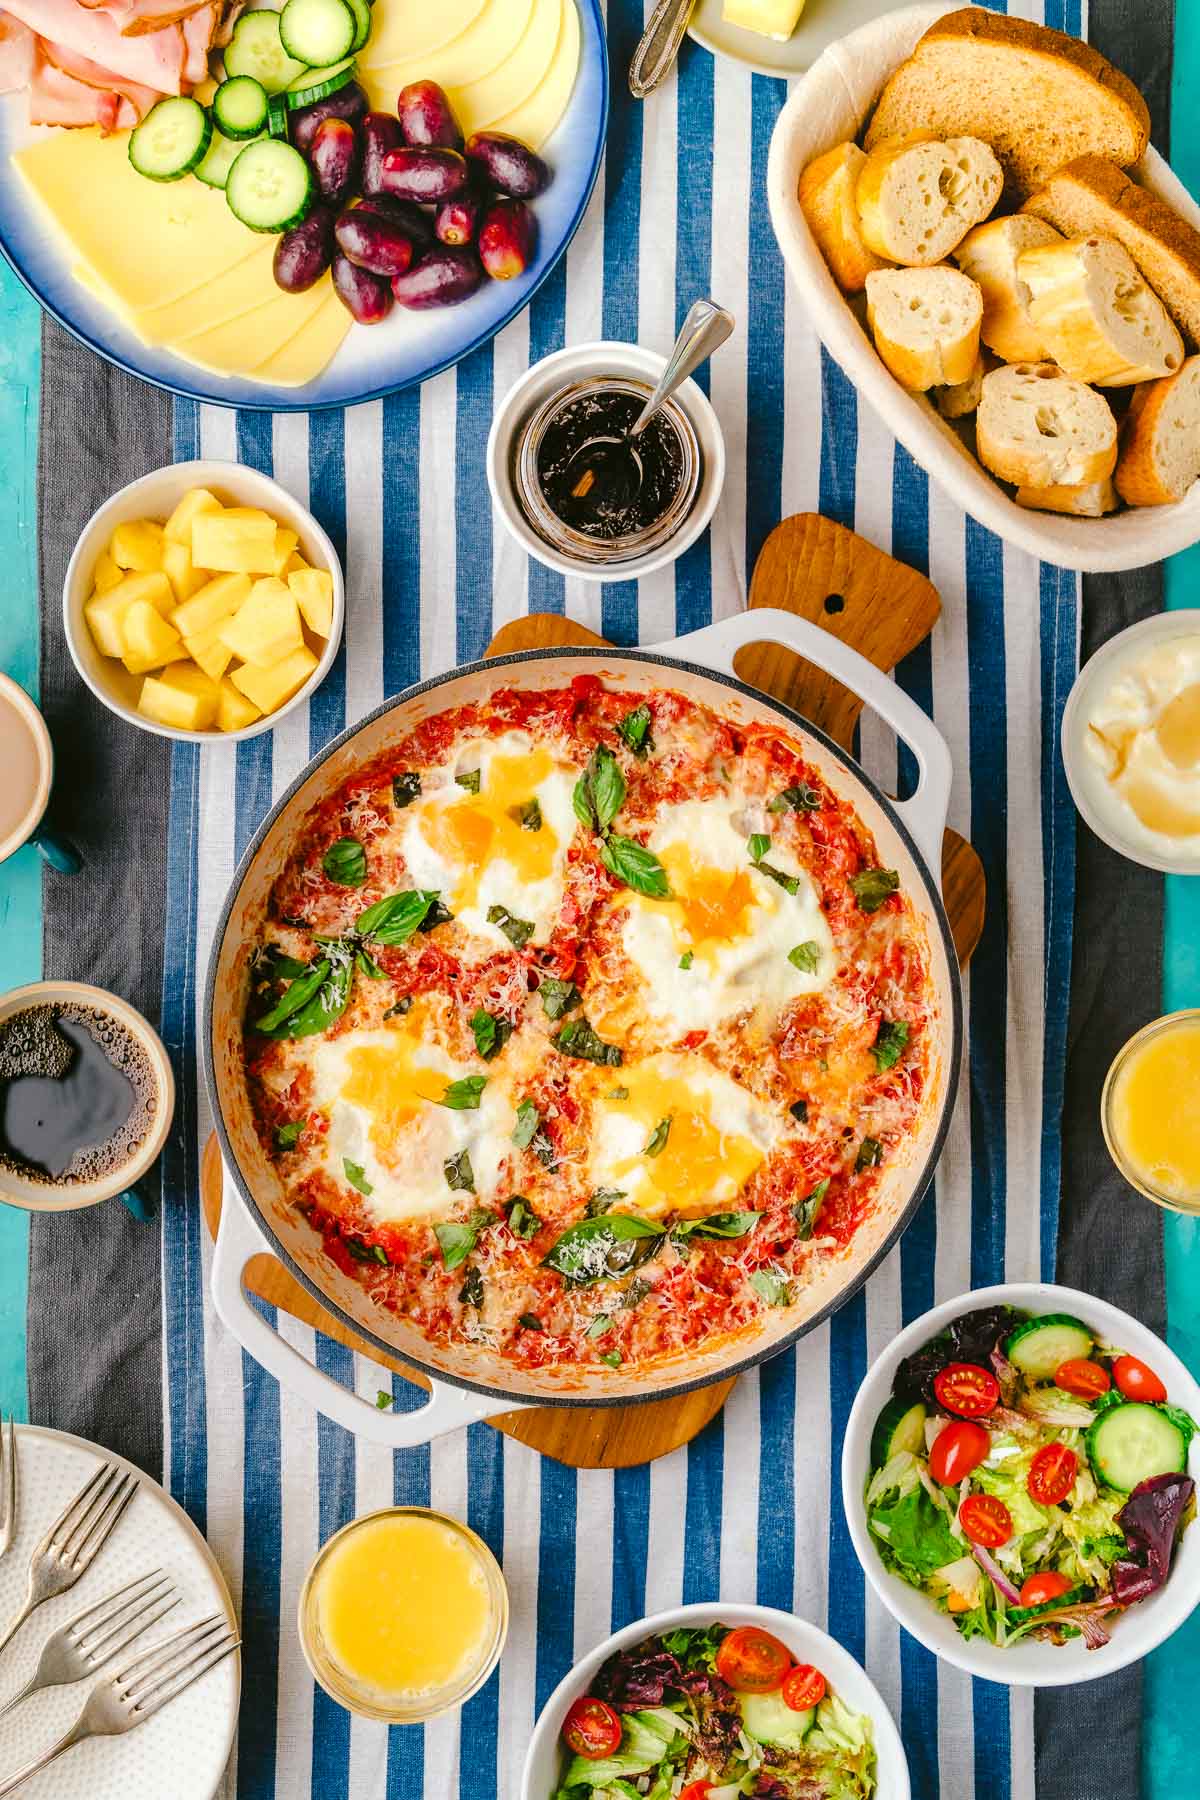 a skillet of eggs in purgatory next to a meat and cheese tray, a basket of sliced crusty bread, jam in a jar, a bowl of pineapple, a cup of coffee, a cup of orange juice, 2 bowls of salad, a bowl of yogurt, and a plate of forks.